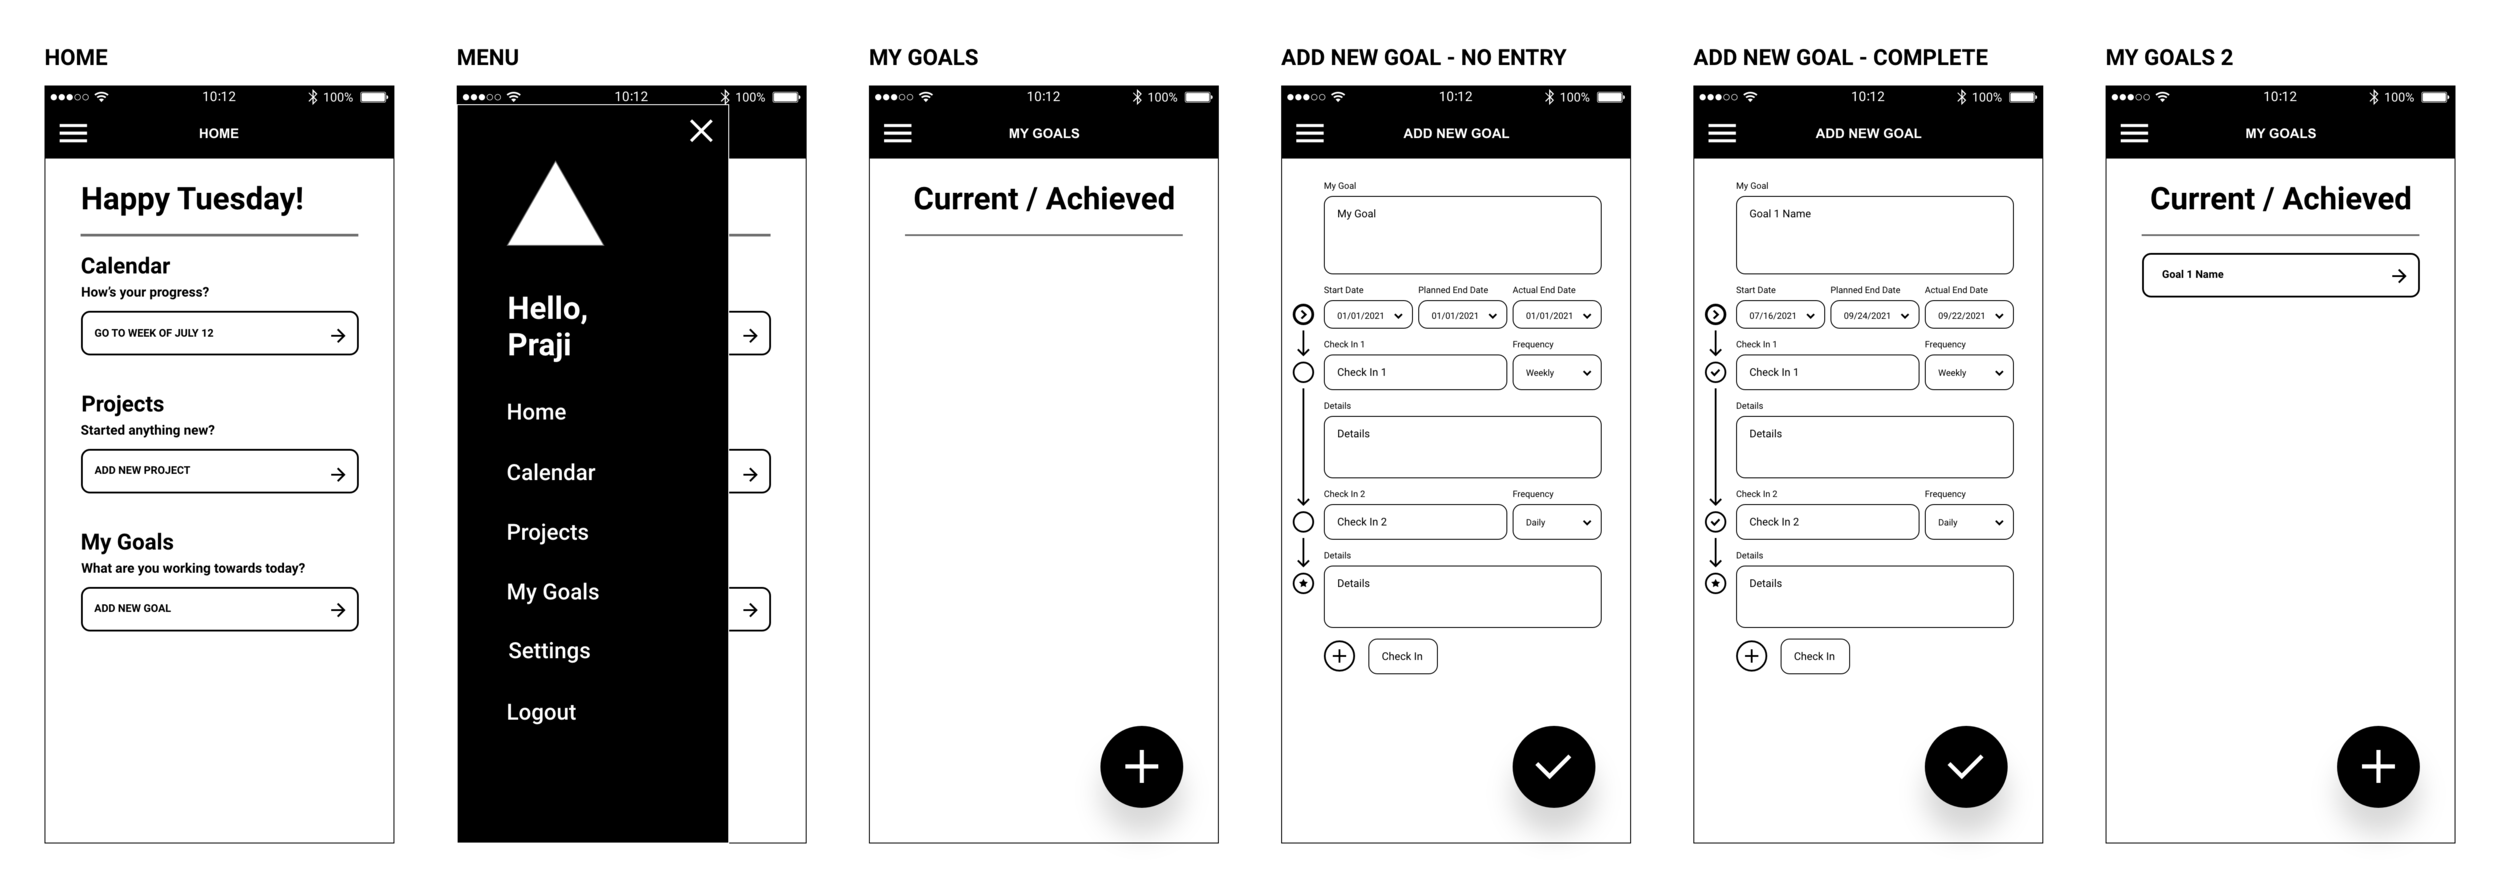 WIREFRAMES - Red Route 3 - New User Adding New Goal